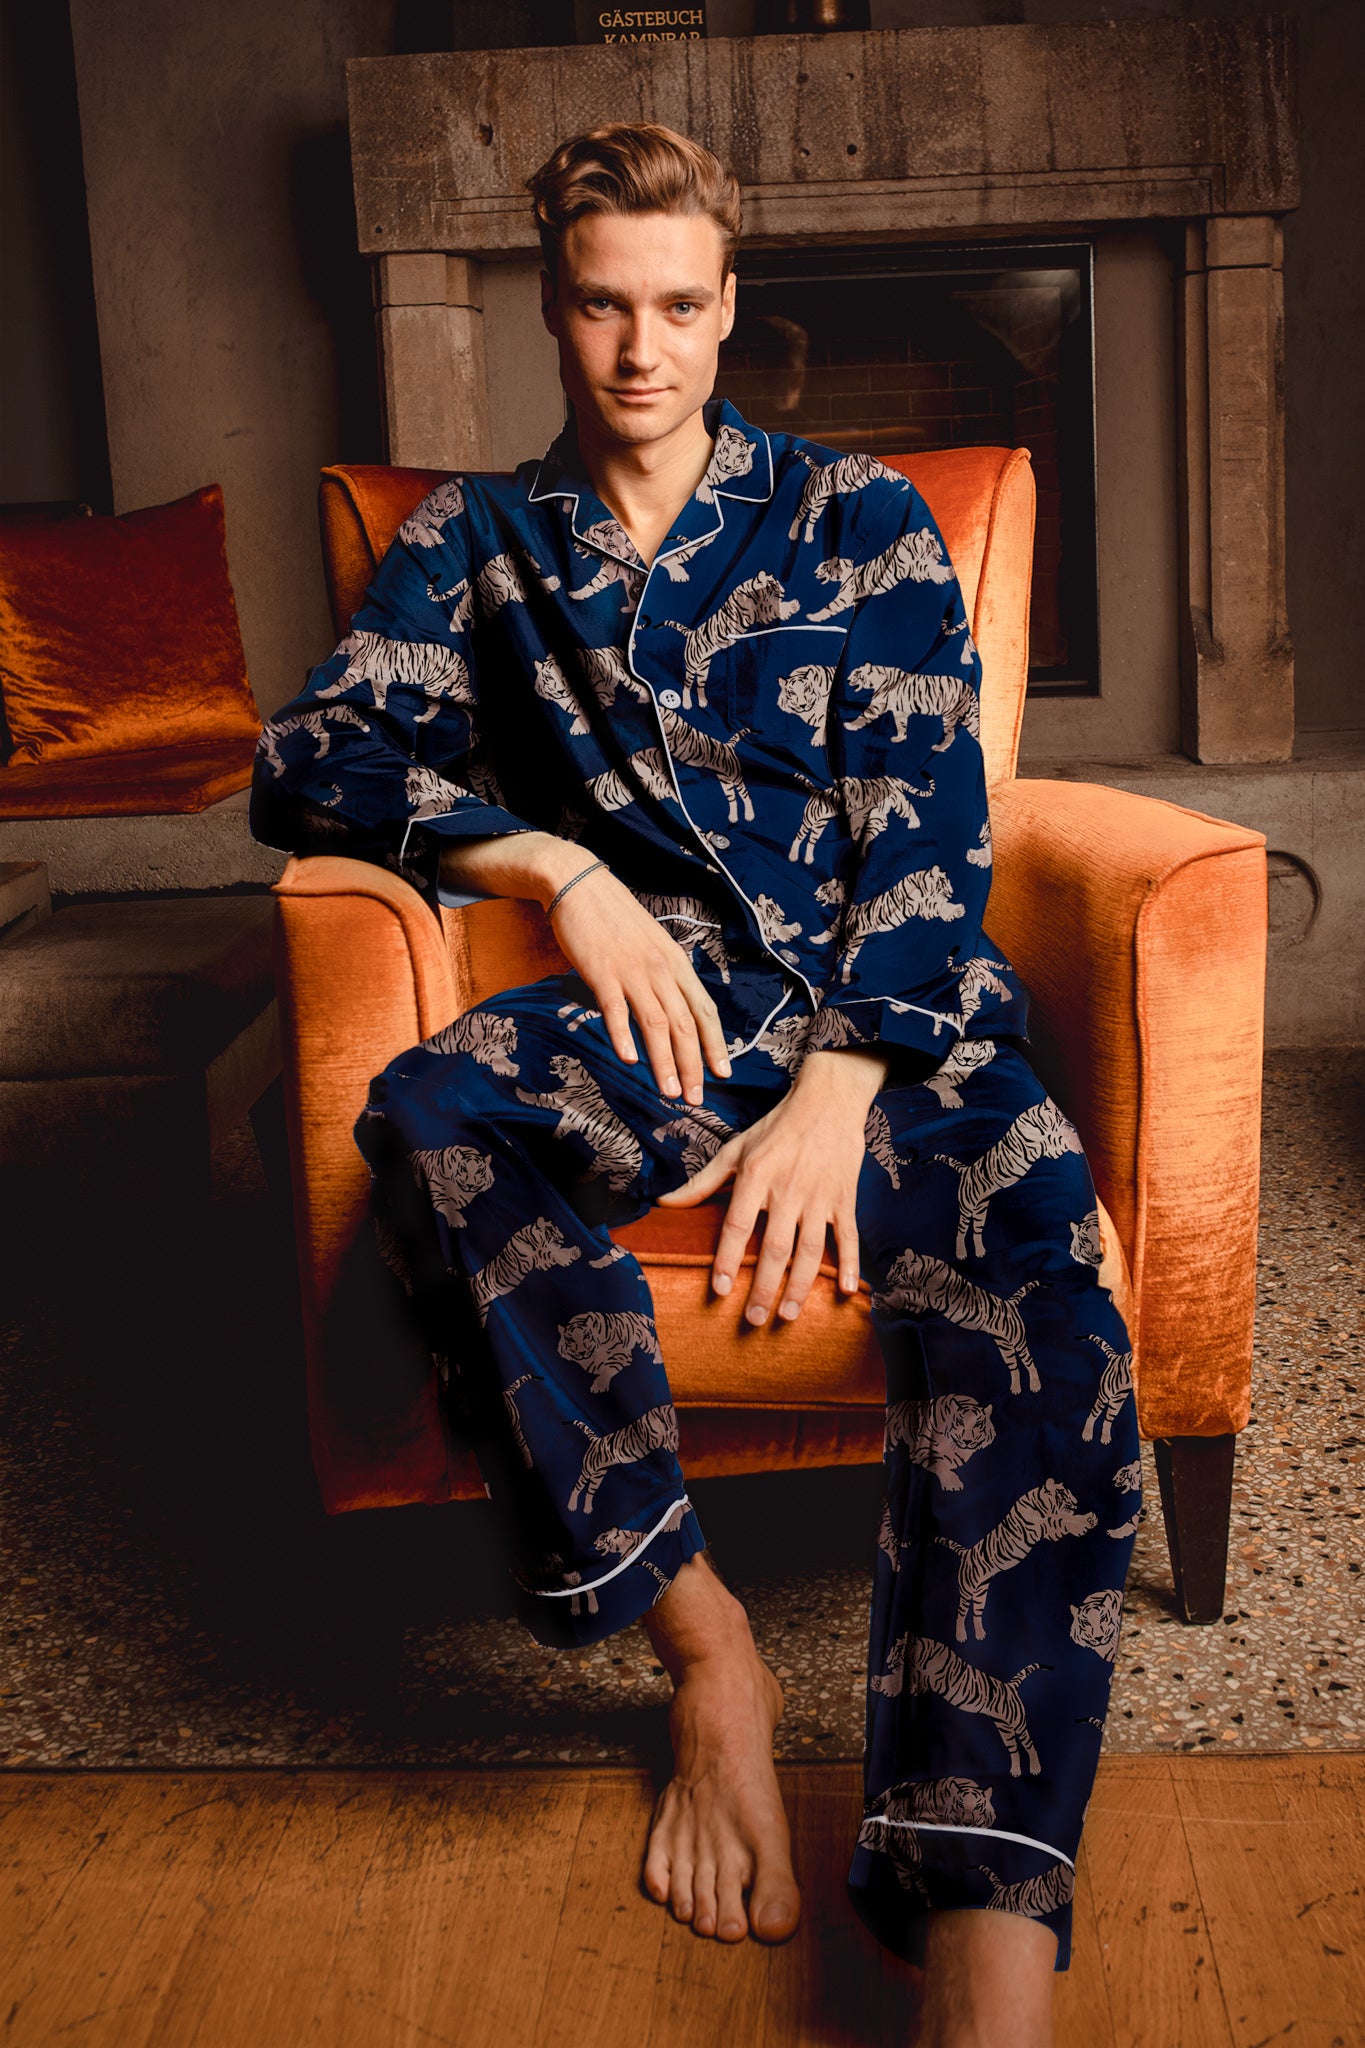 SilSilk Pajama Sets for Couples, Luxury Matching Sets